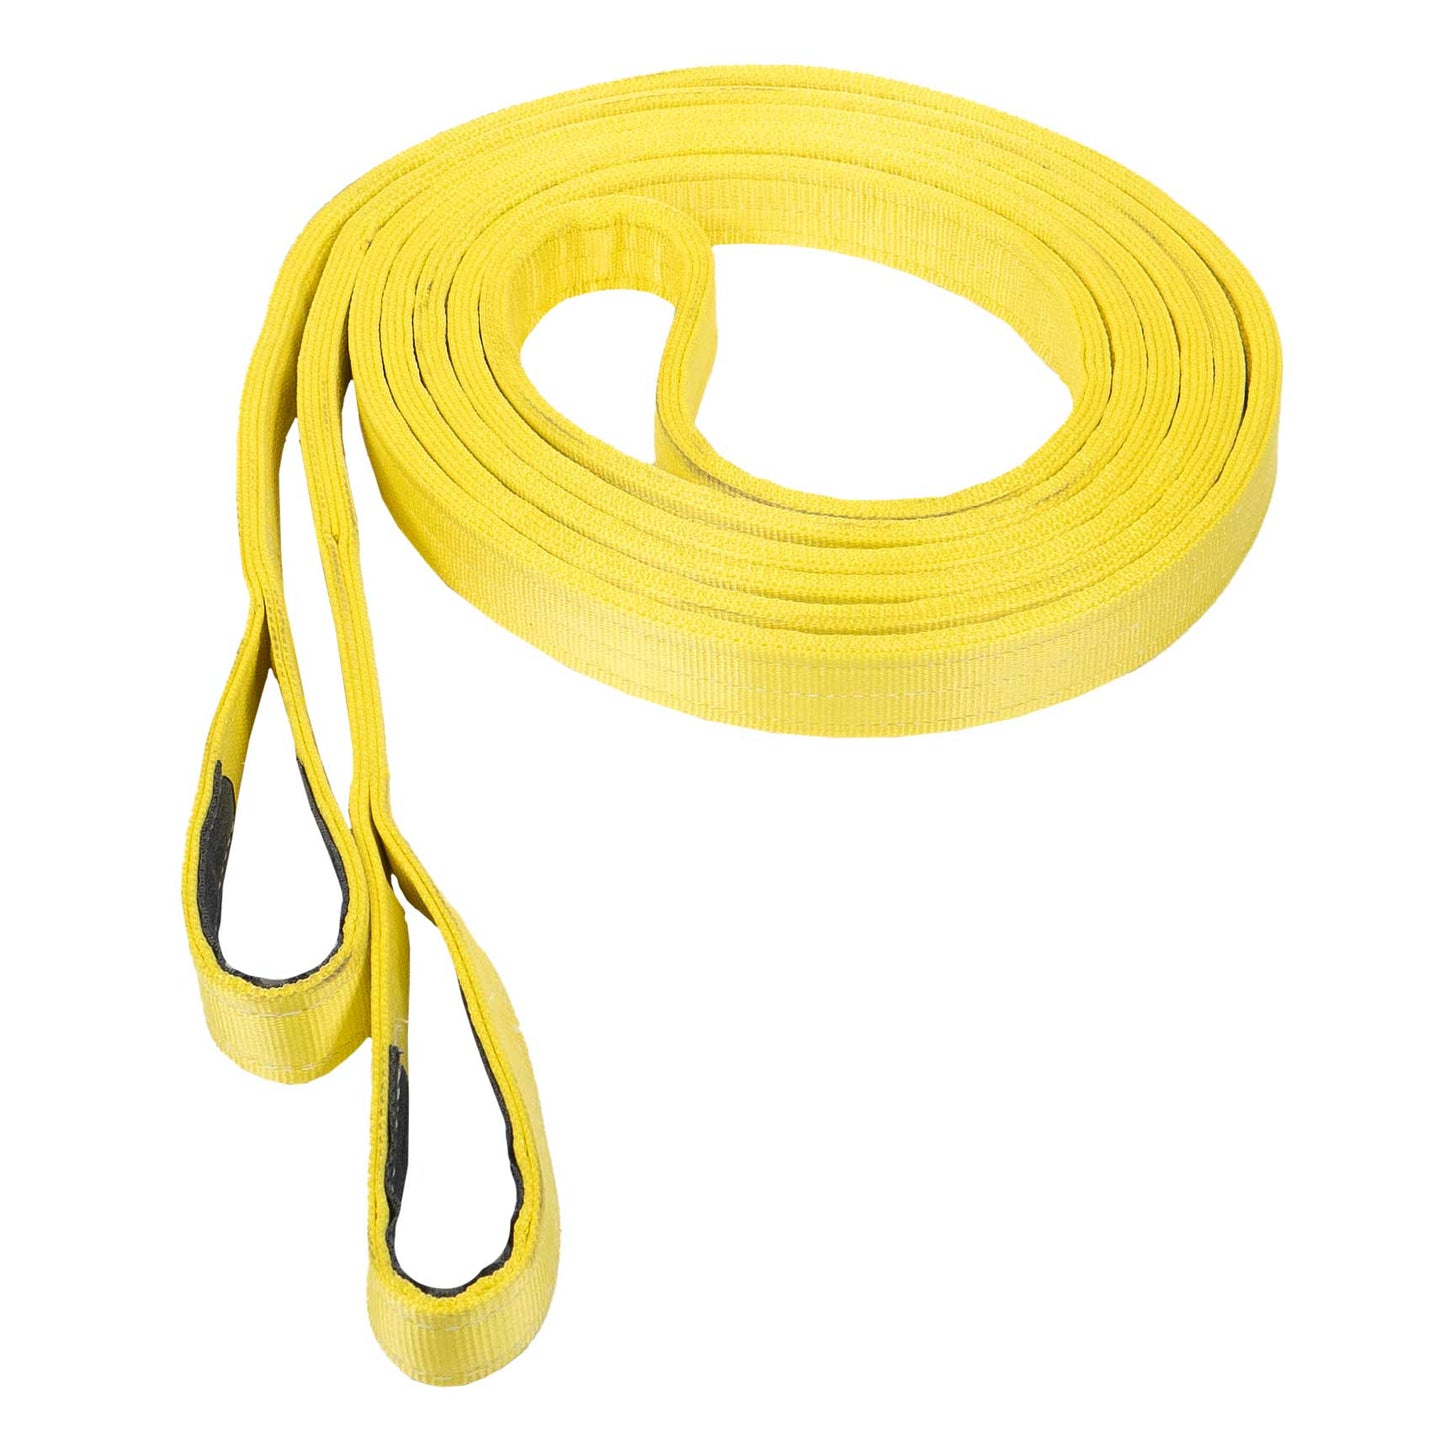 2" x 30' Heavy Duty Recovery Strap with Reinforced Cordura Eyes - 4 Ply | 27,500 WLL